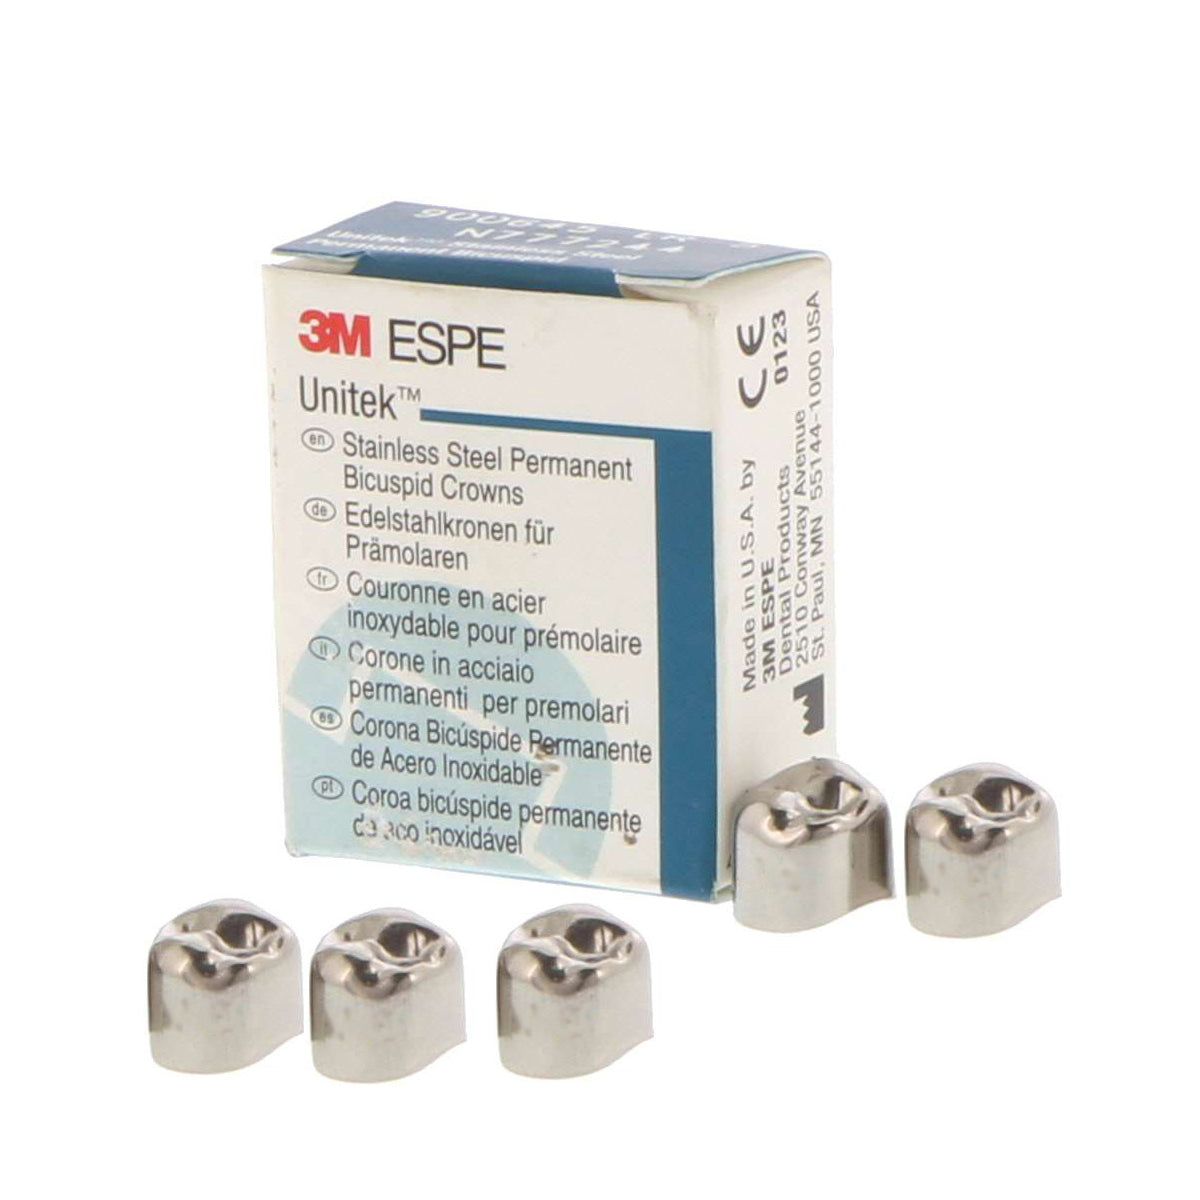 3M ESPE Unitek #6 Upper Left Primary Central Stainless Steel Crown For Pediatric Use- 5 Crowns/Box